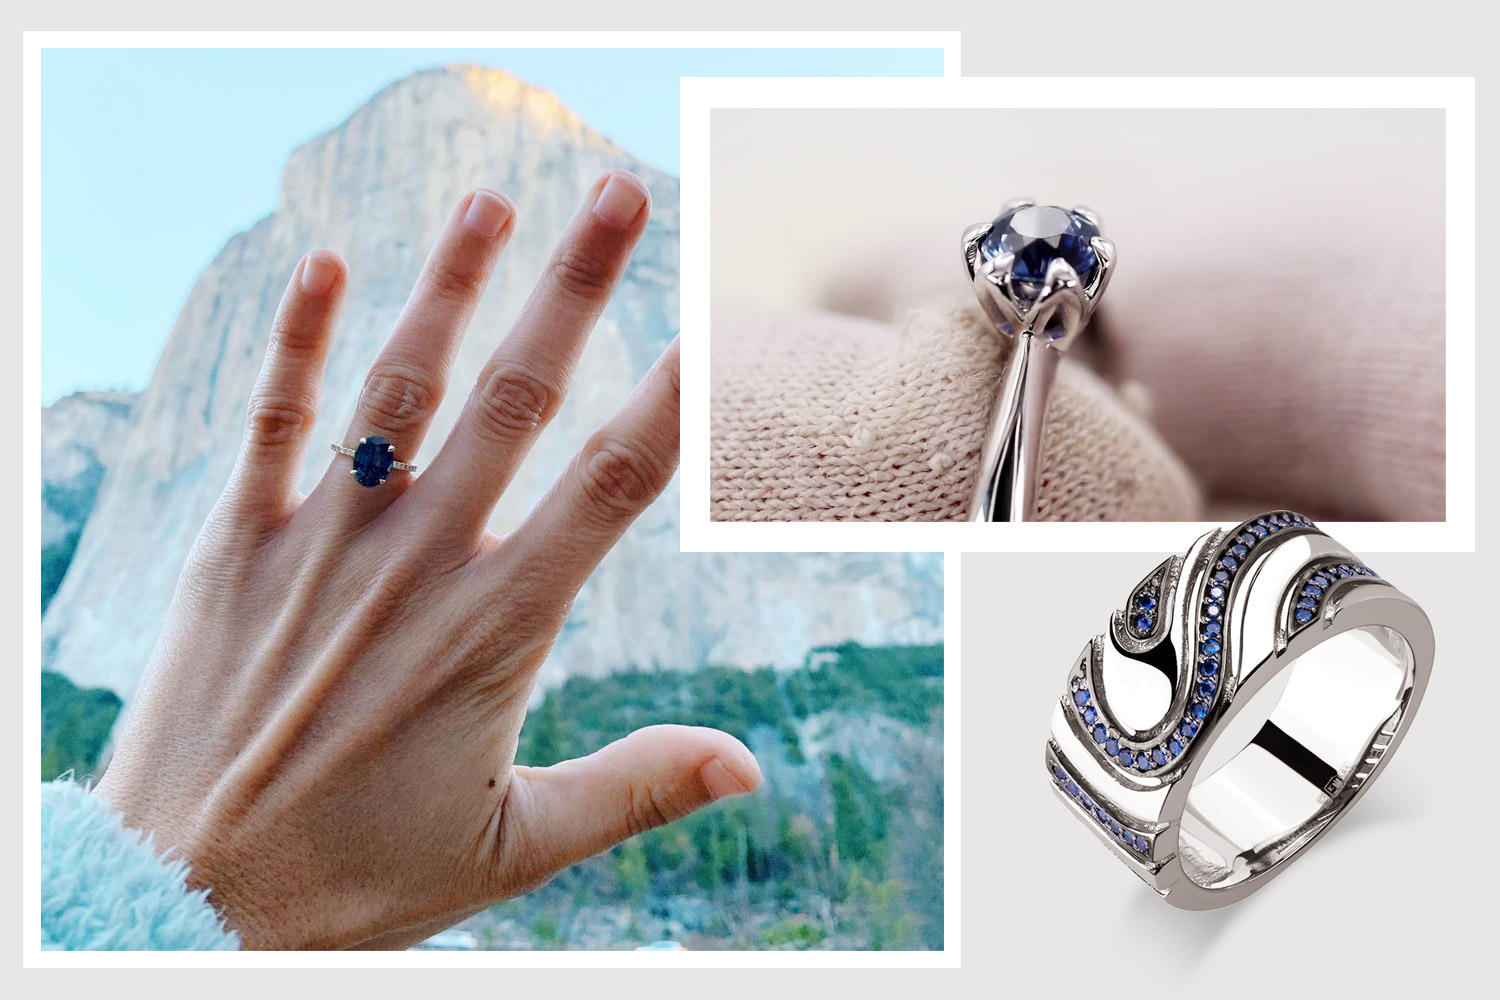 What sapphires are suitable for making engagement rings?